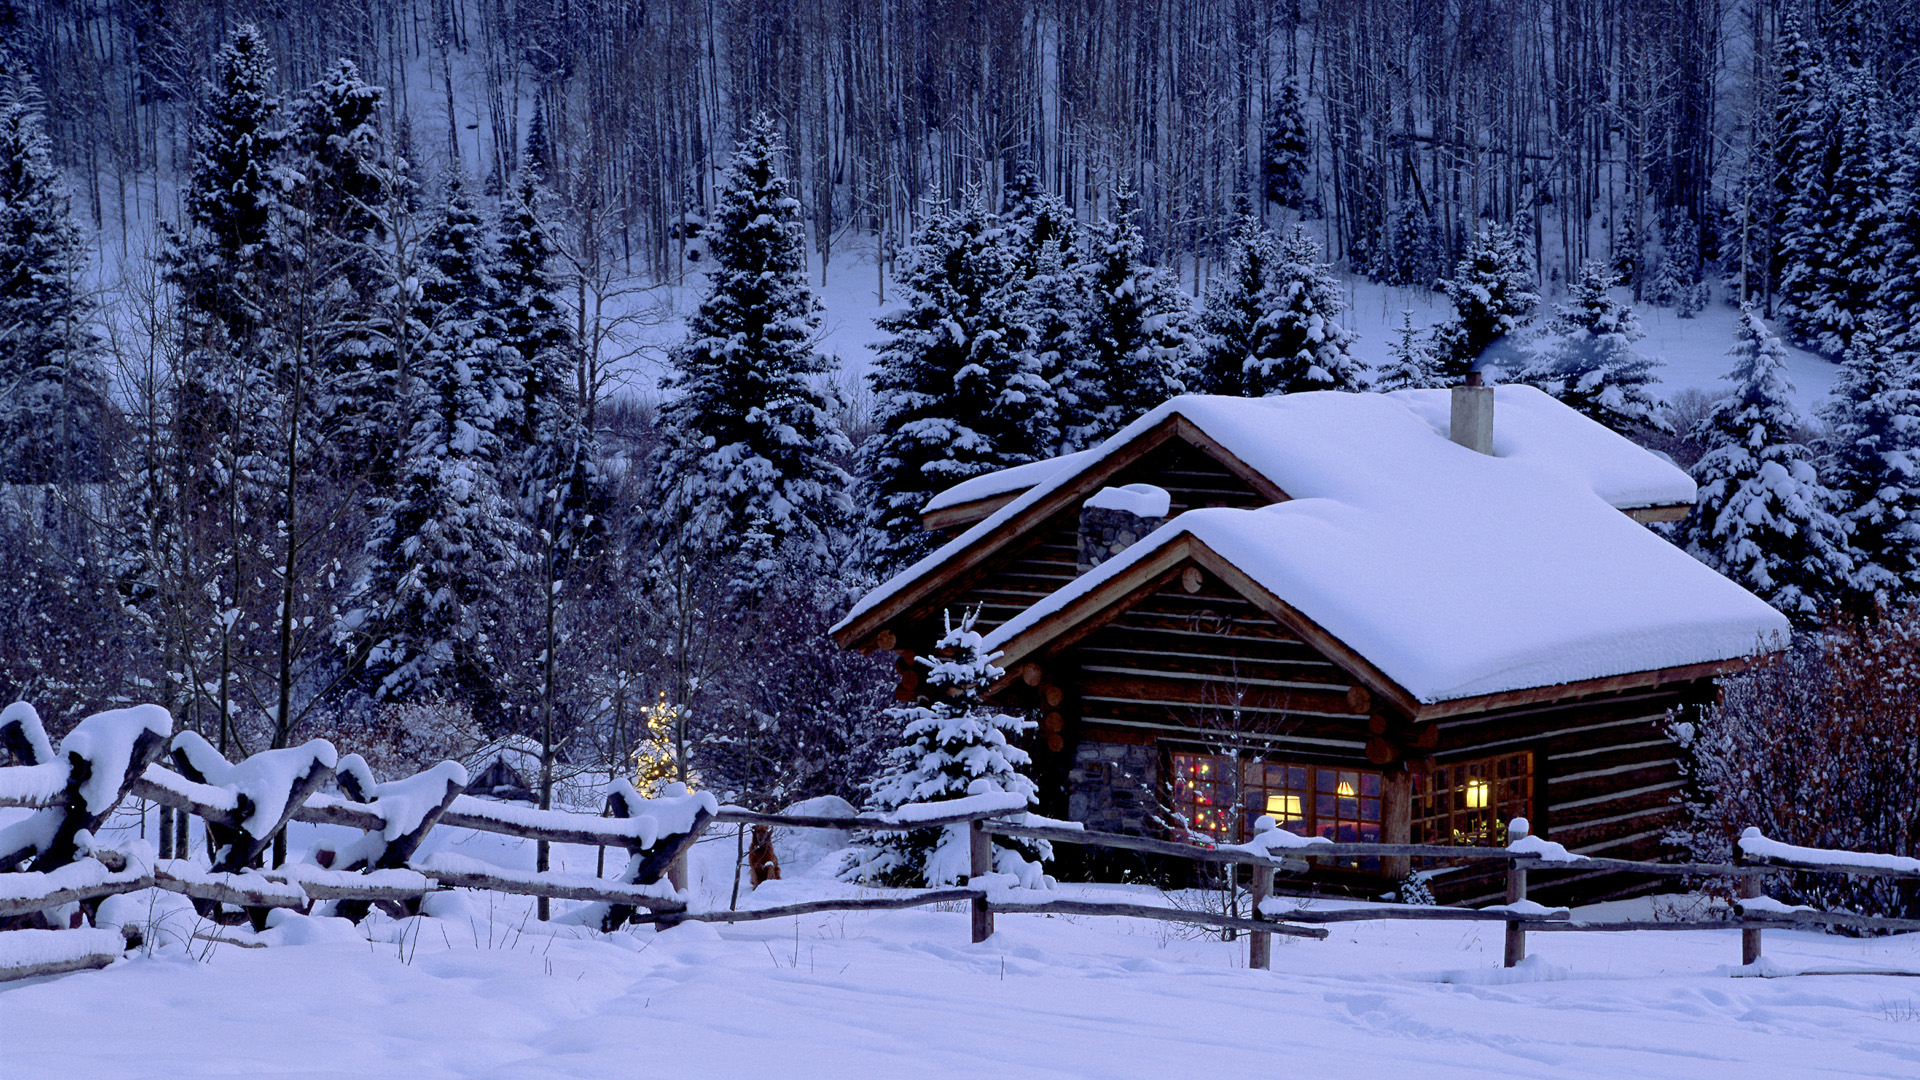 Cozy Winter HD Wallpapers 1000 Free Cozy Winter Wallpaper Images For All  Devices